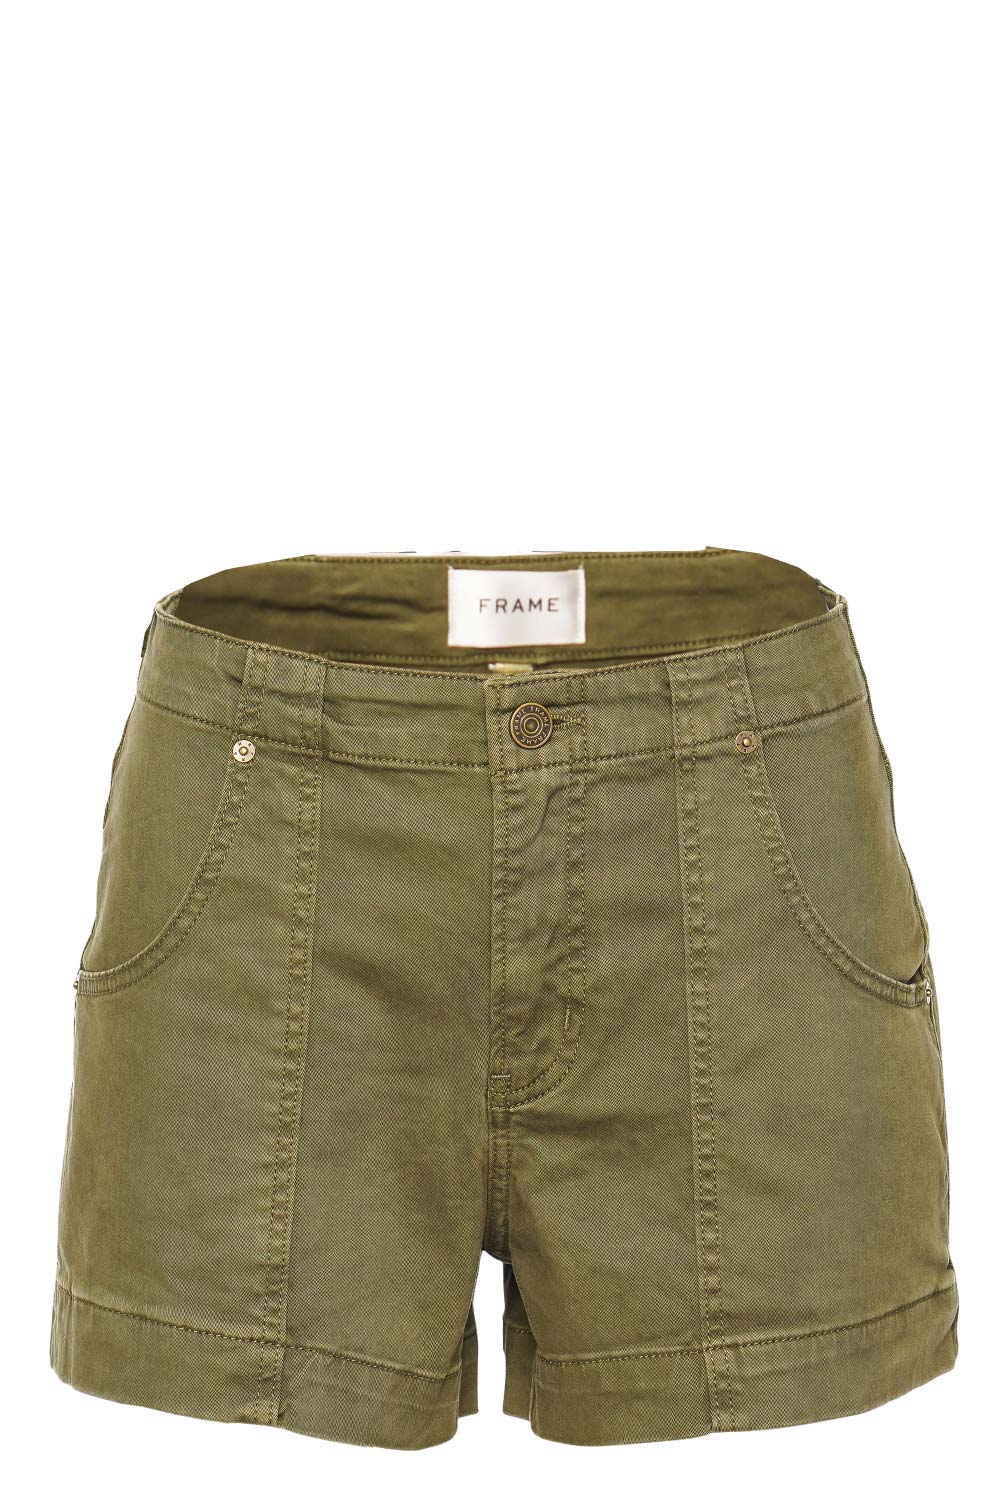 FRAME Clean Washed Utility Shorts